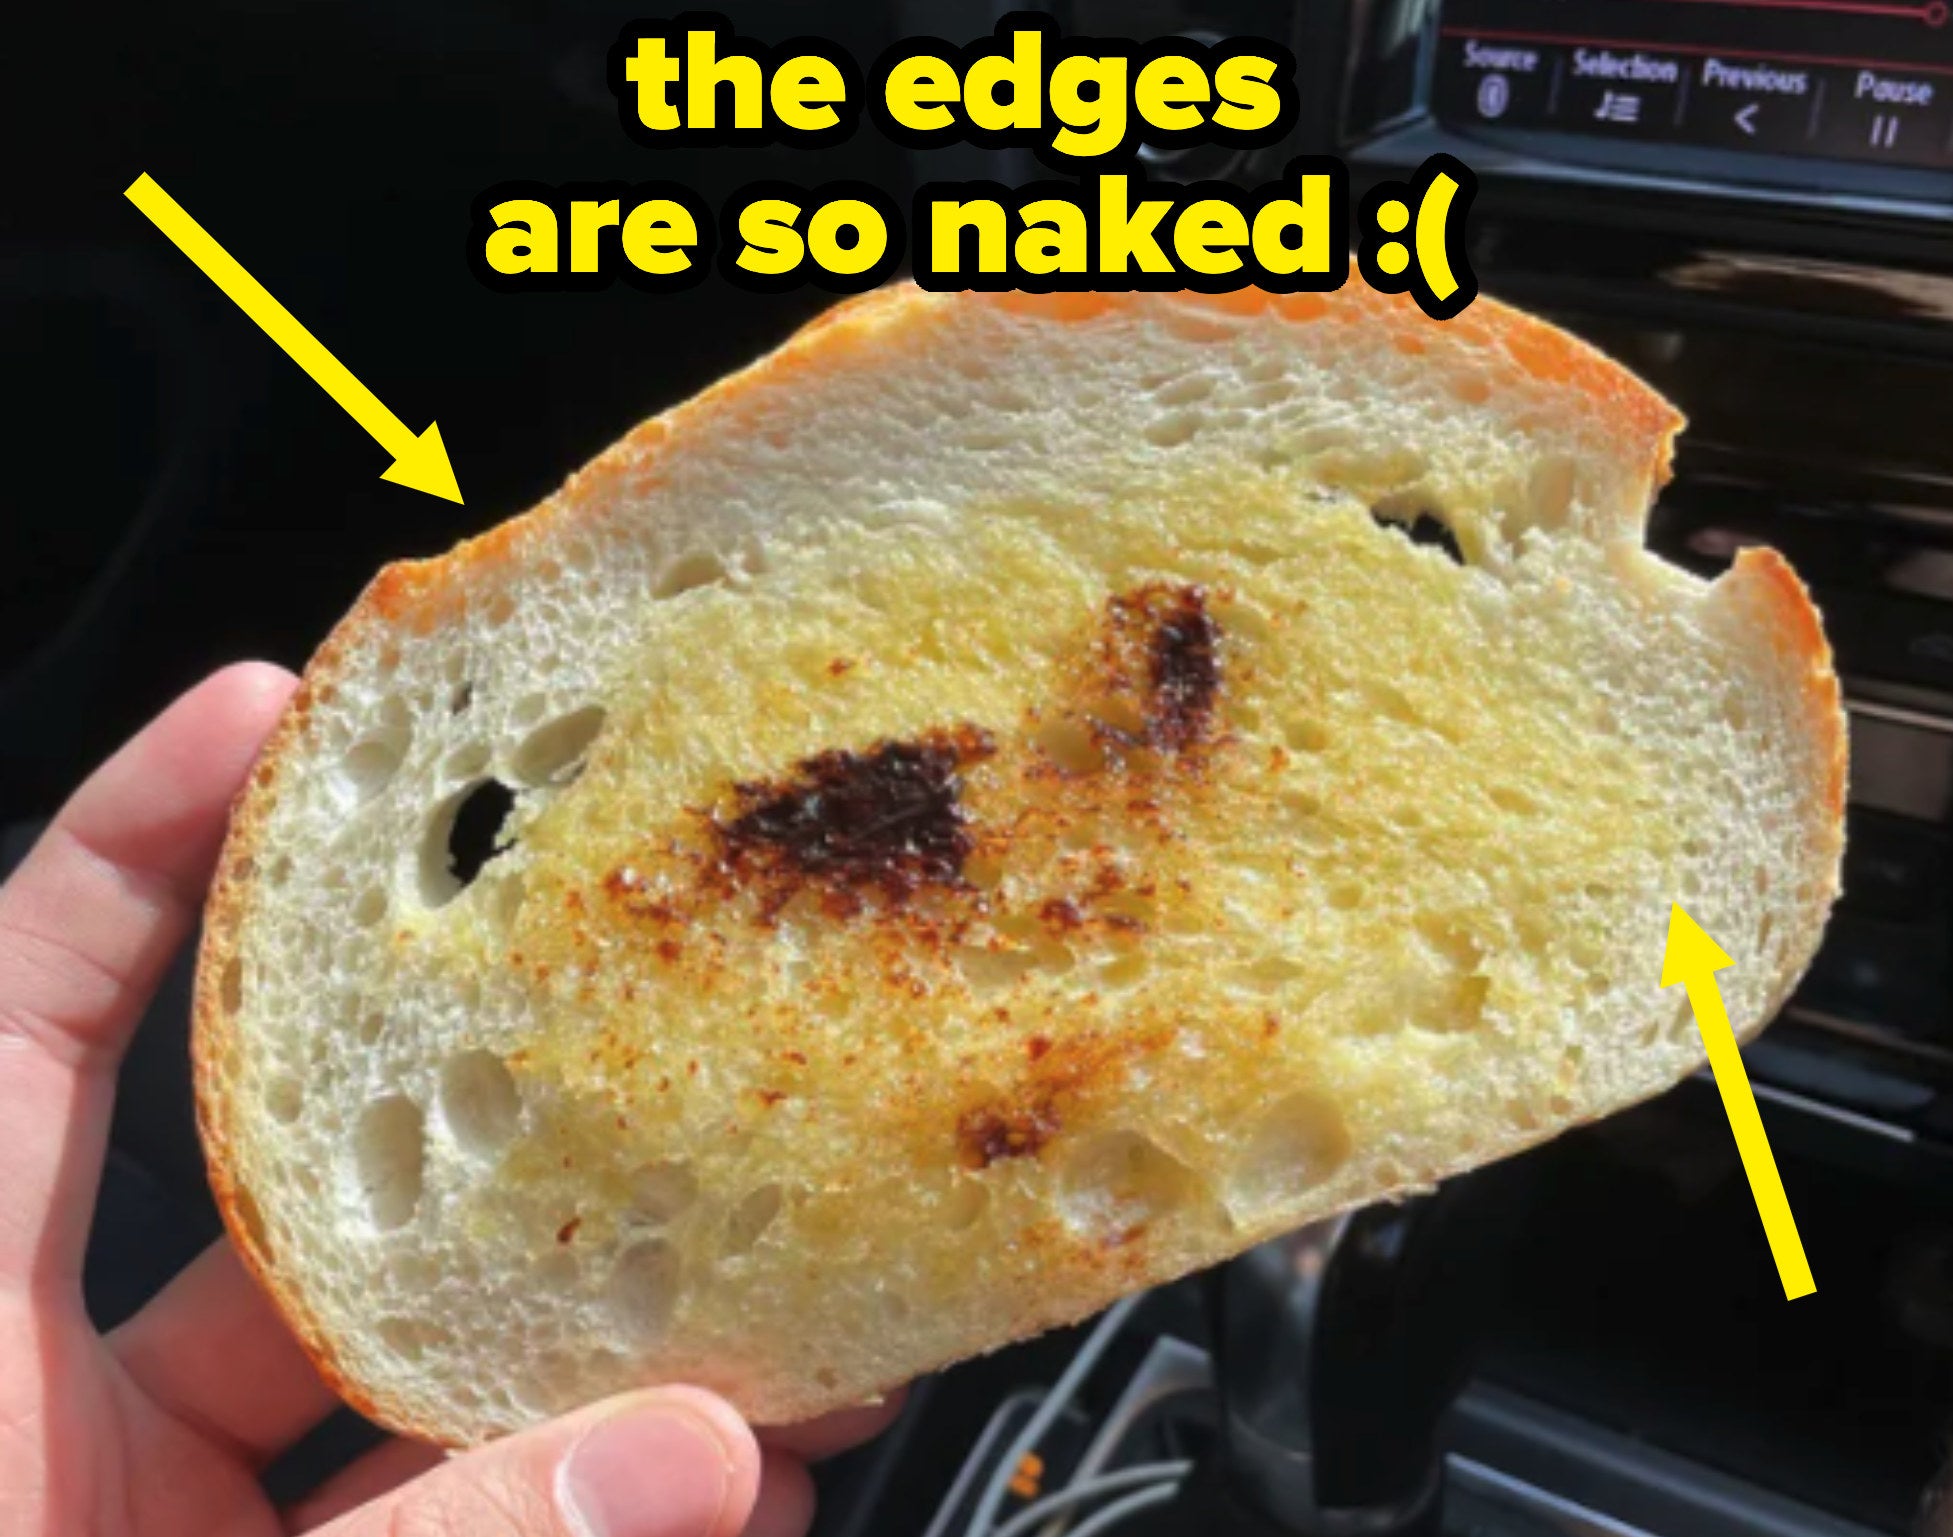 A close up of the Vegemite toast; there are arrows highlighting how the butter and Vegemite has not been spread to the edges